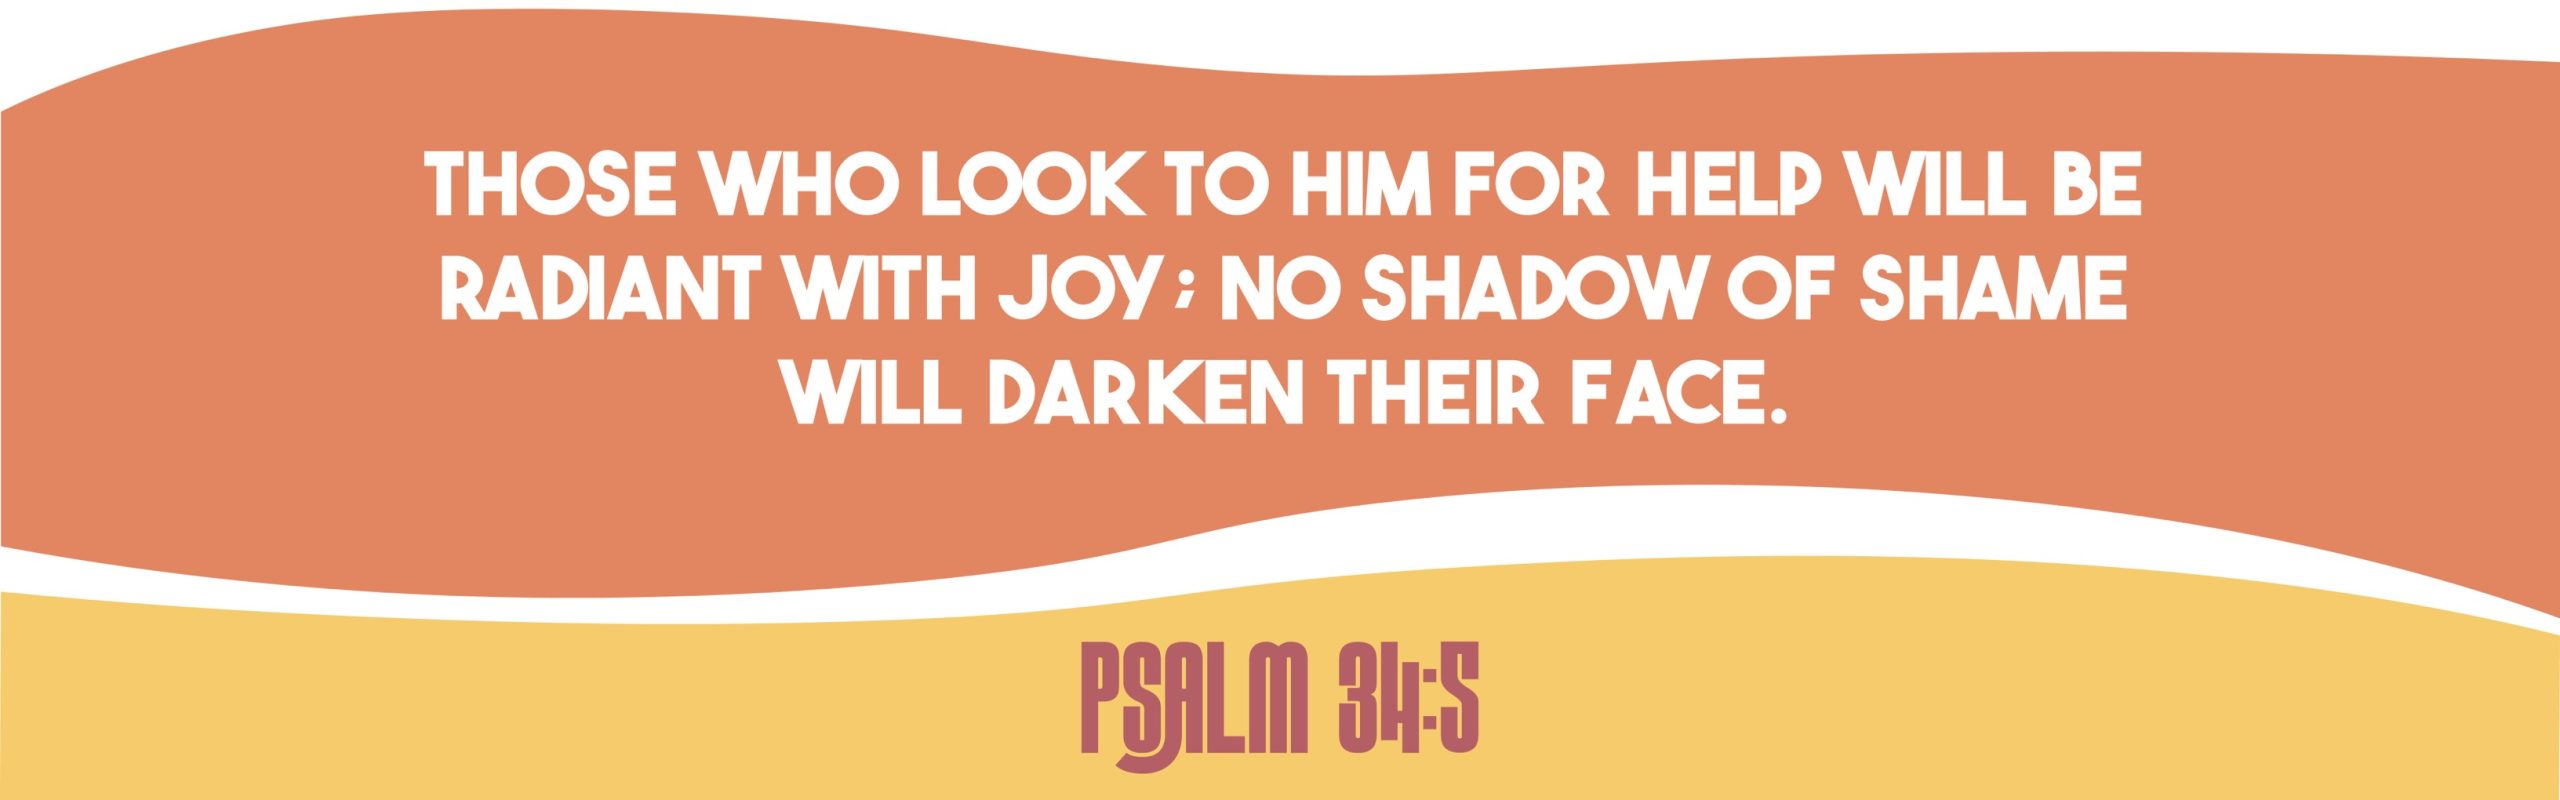 Psalm 34:5 scripture reference